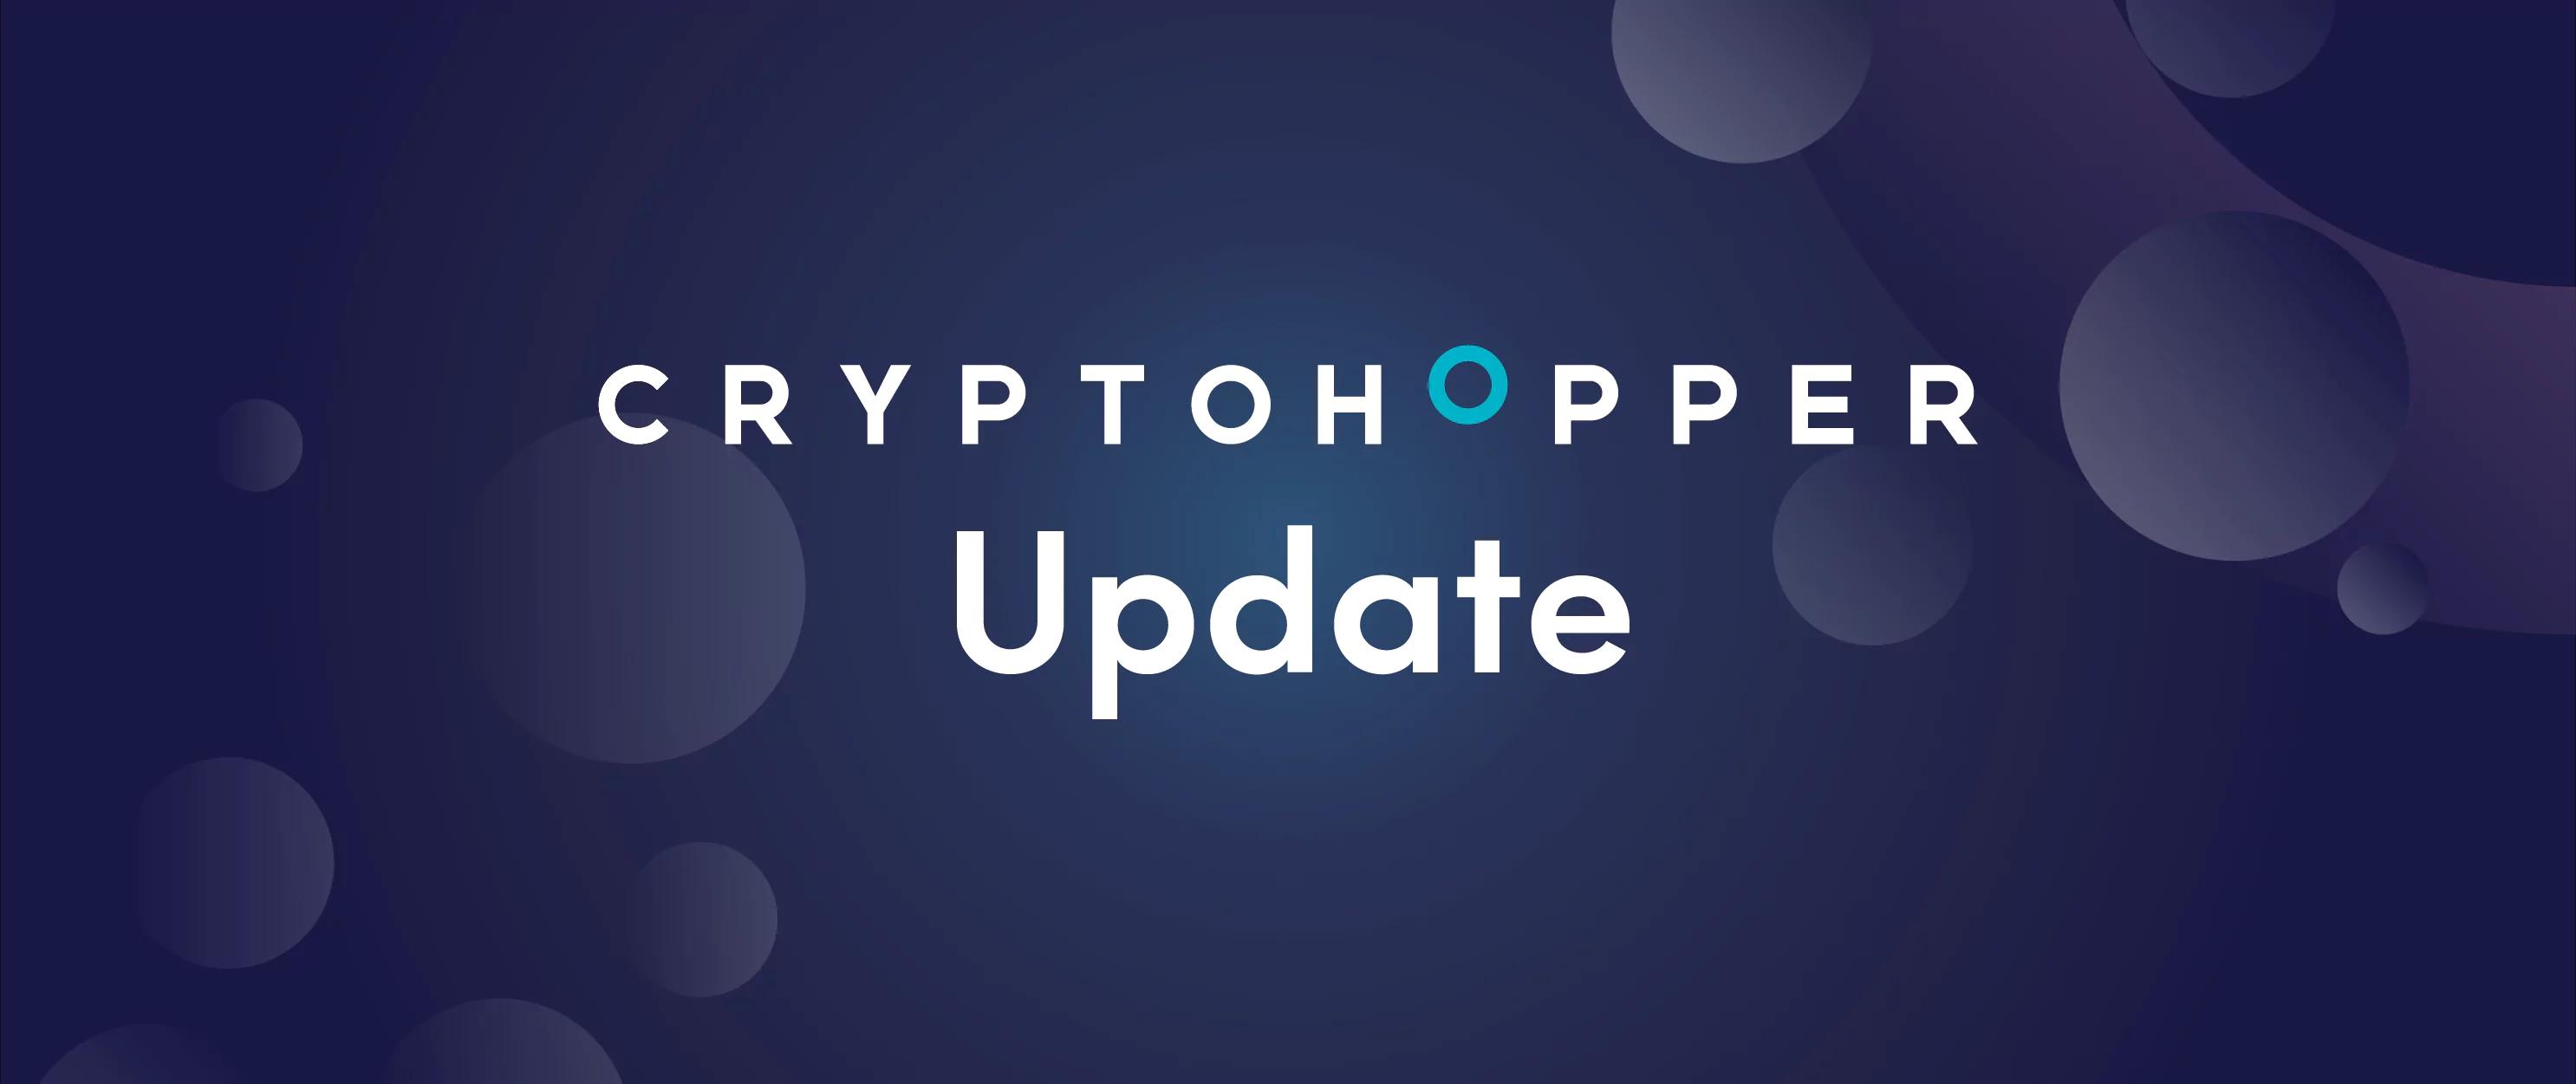 A new email service is in place for Cryptohopper newsletters